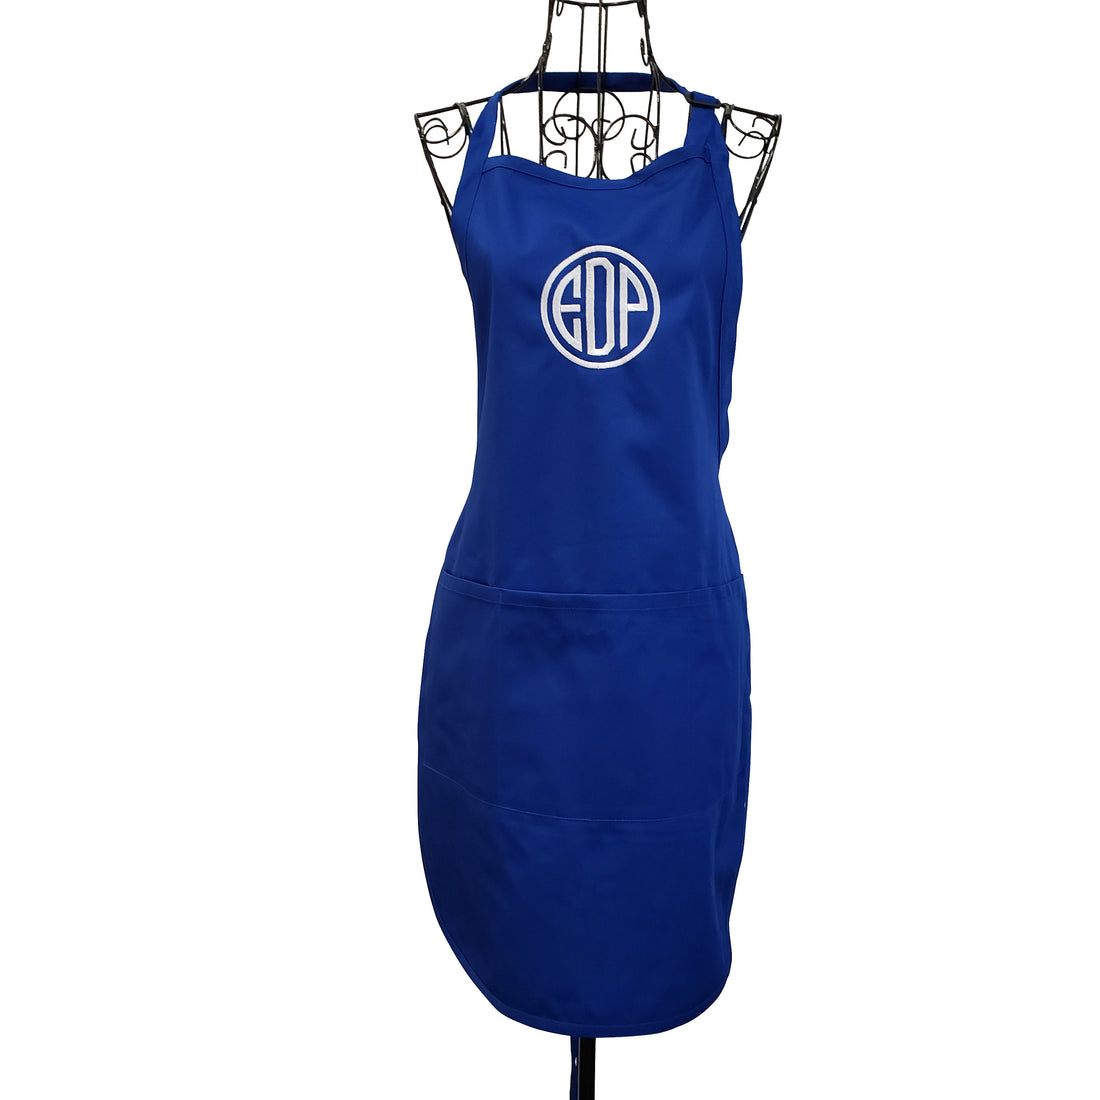 Personalized aprons for women - Life Has Just Begun